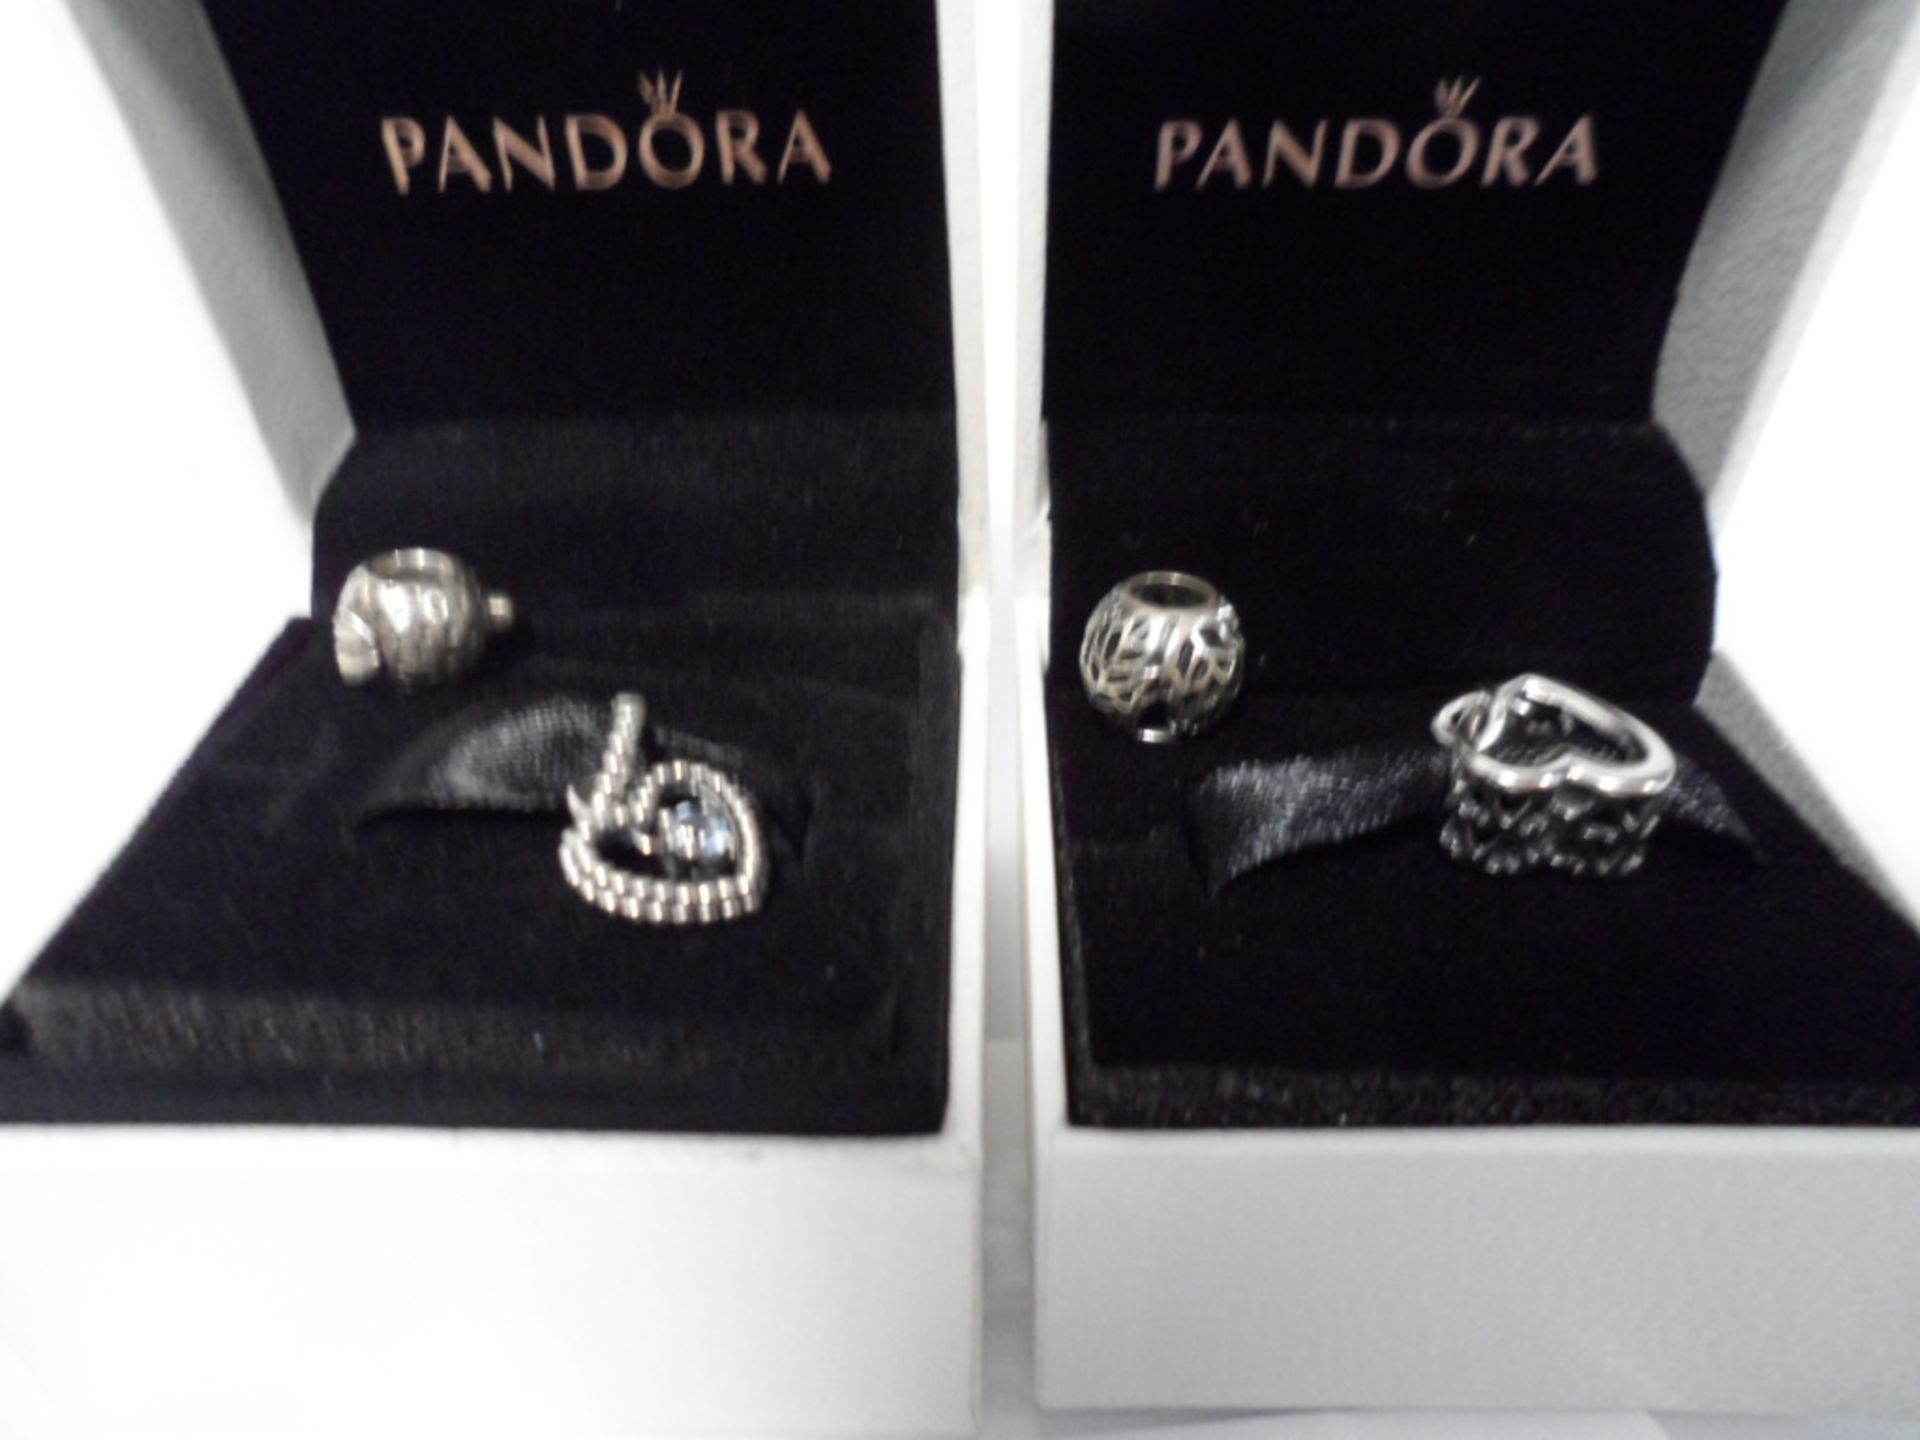 Pandora jewellery items 2 boxed charms and 2 loose charms with earrings. - Image 3 of 3